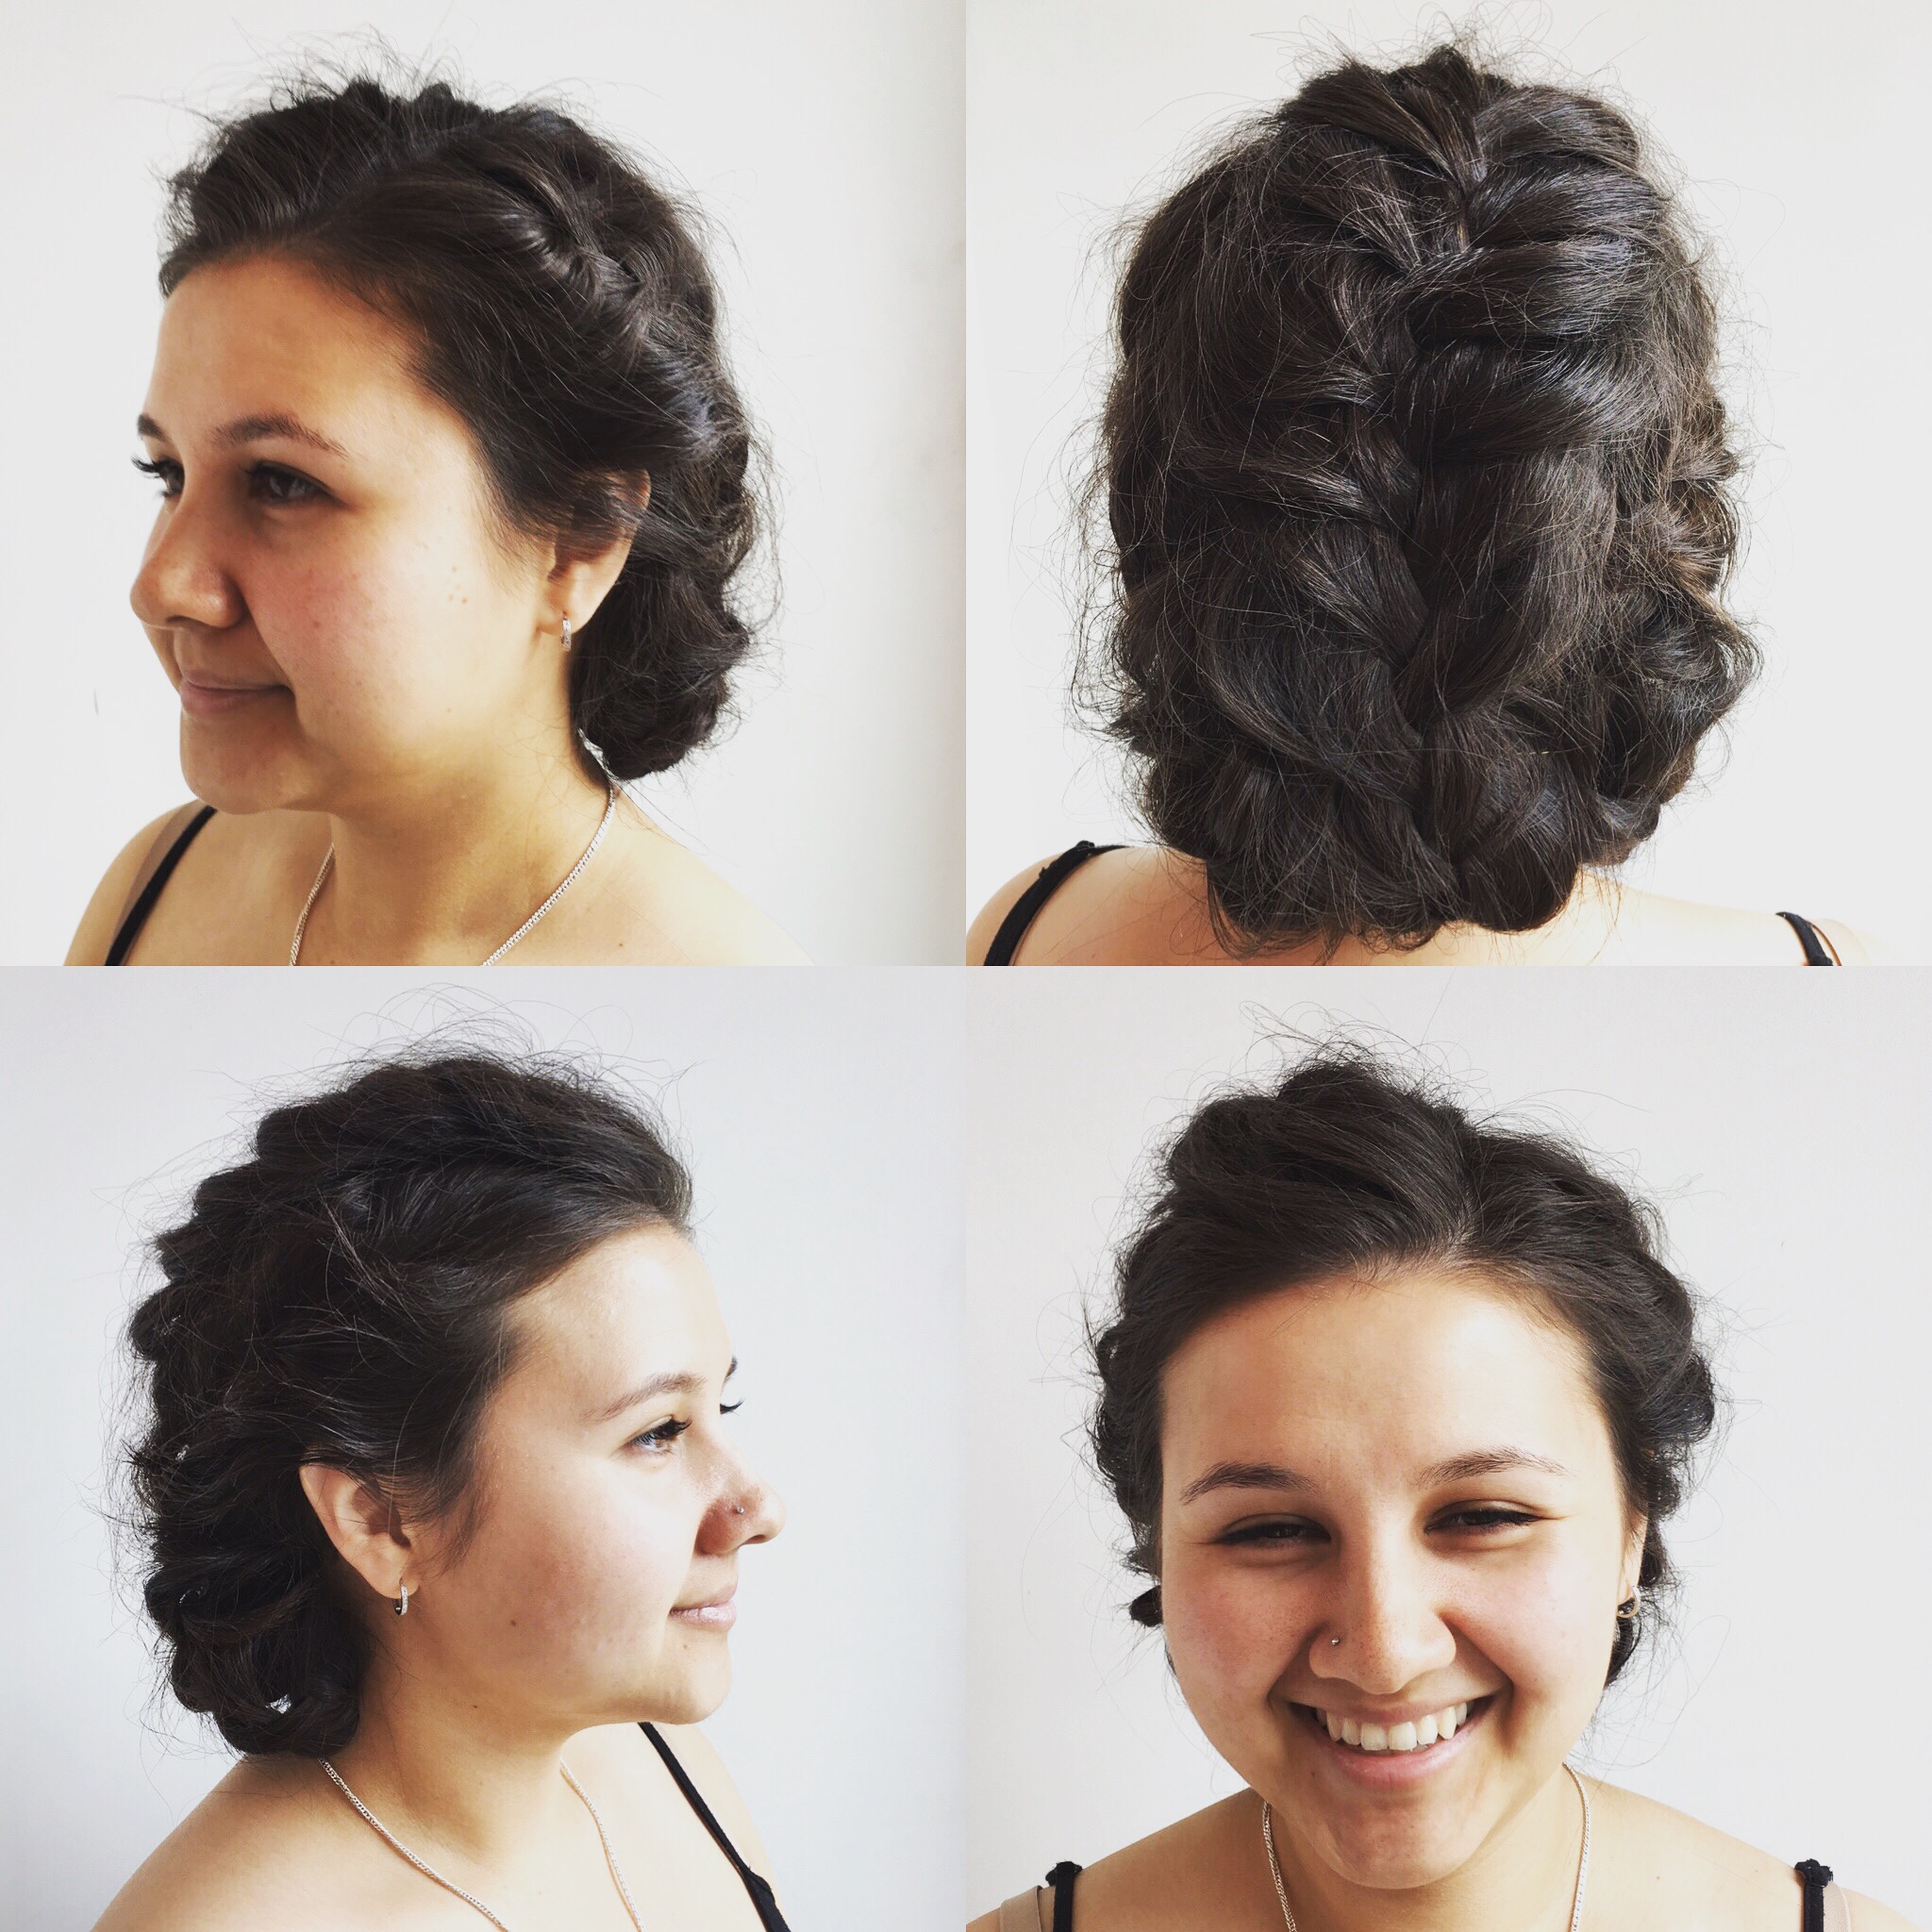 woman smiling with a braided hairstyle